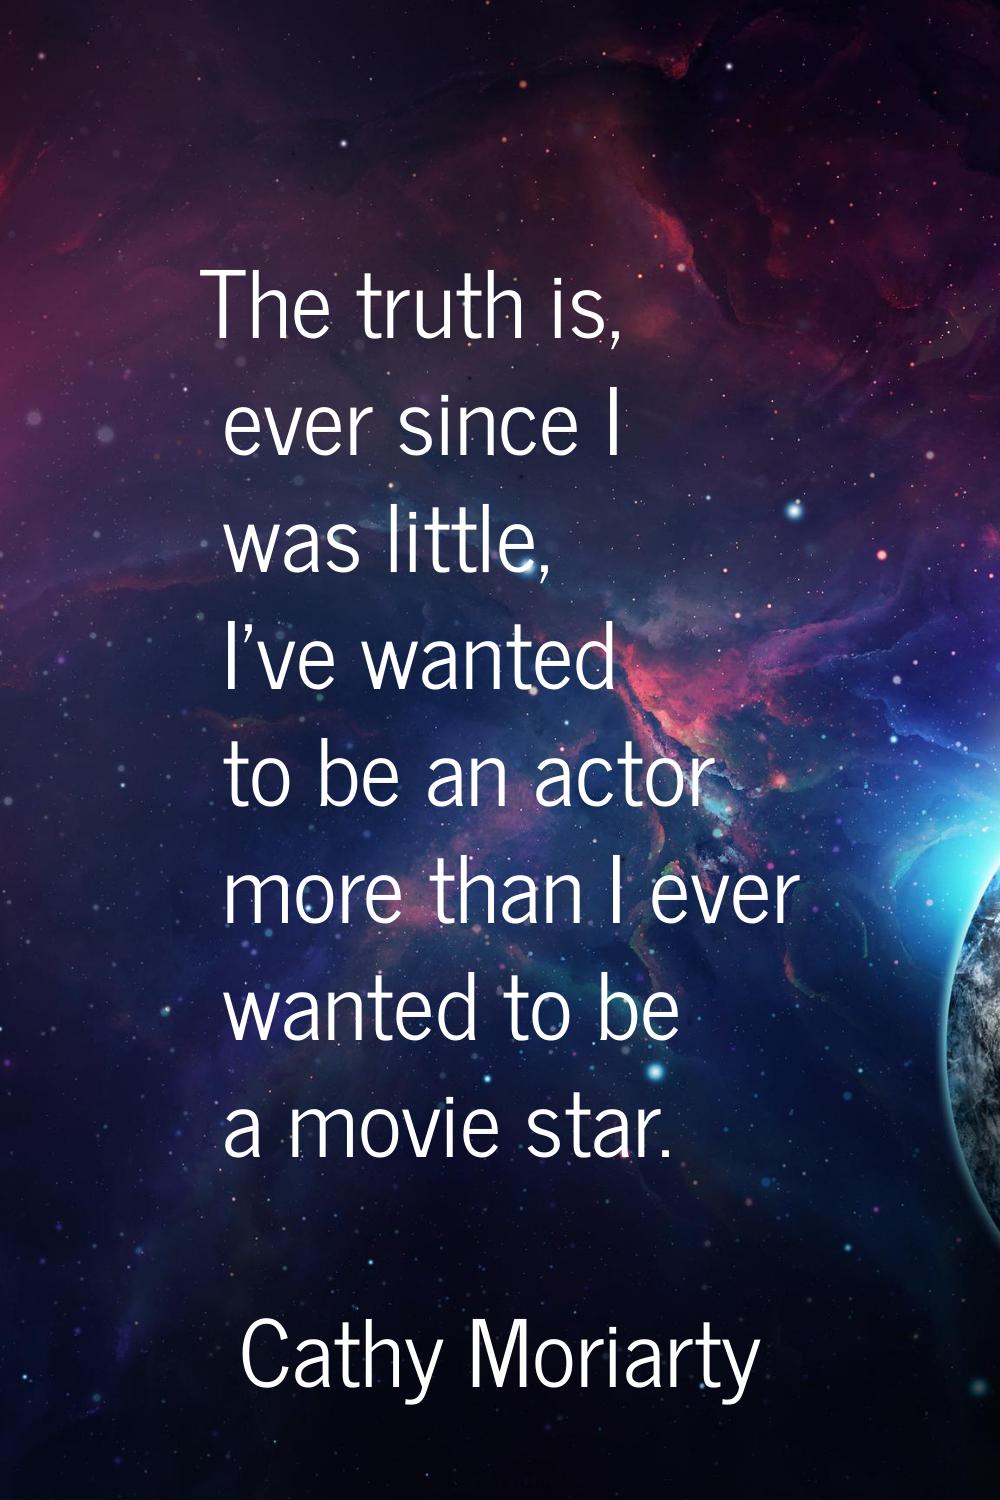 The truth is, ever since I was little, I've wanted to be an actor more than I ever wanted to be a m